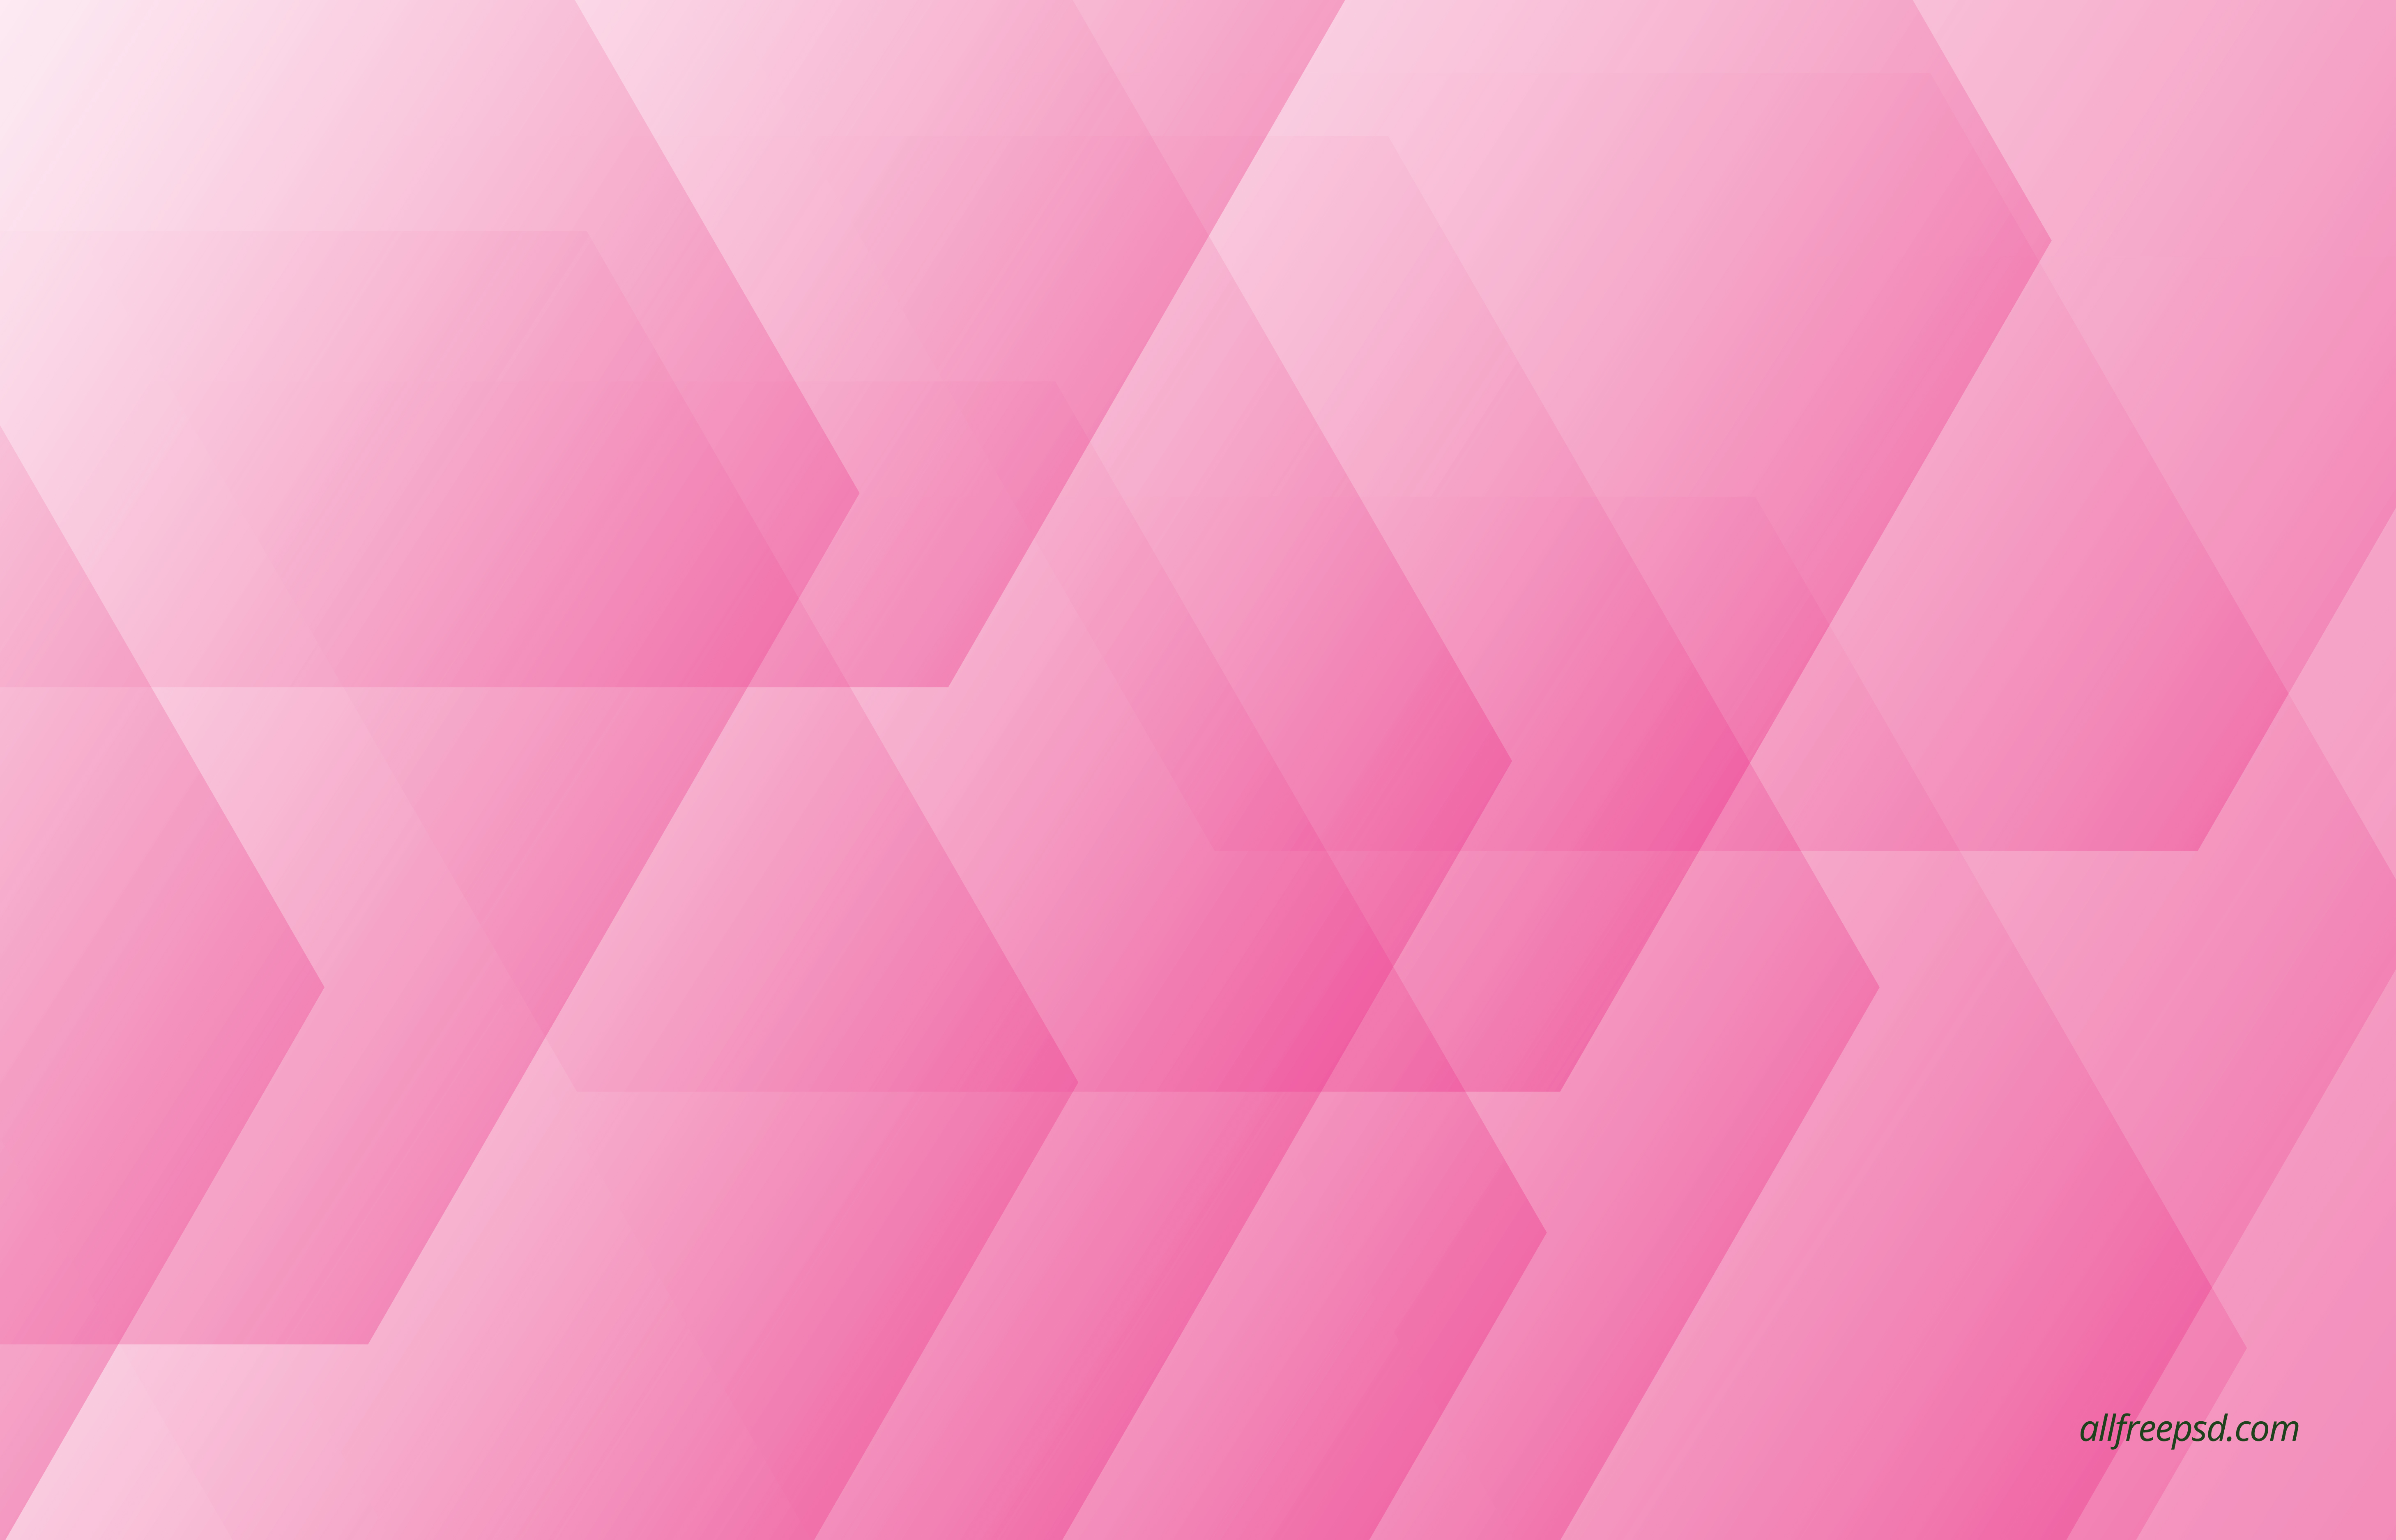 Cool Pink Pattern Background - Free psd and graphic designs